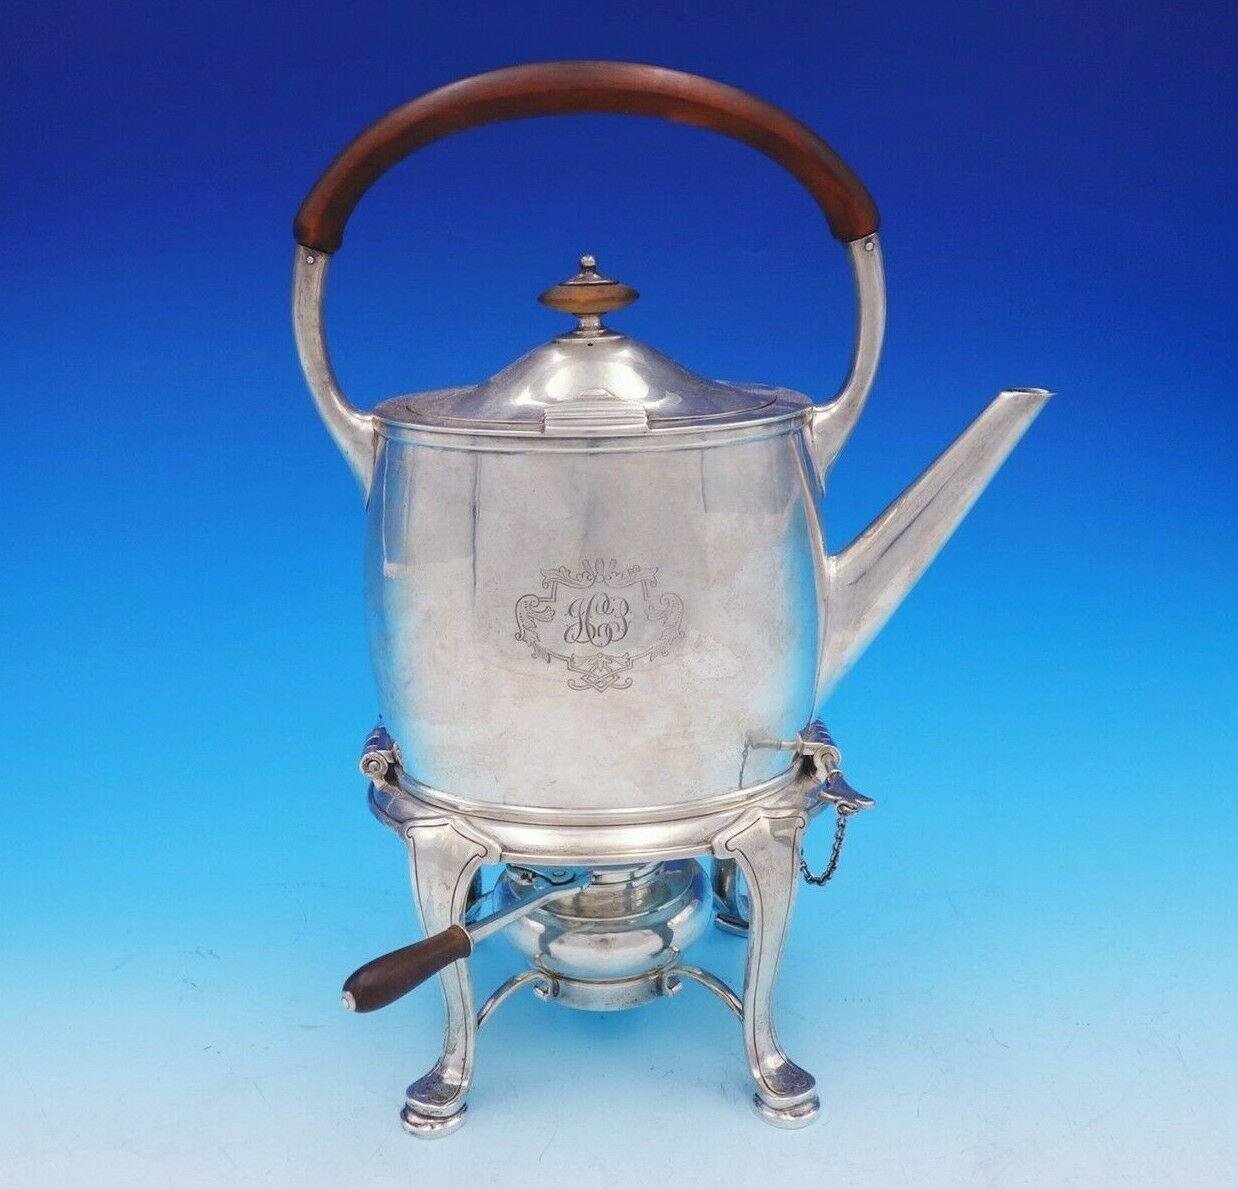 Pointed End by Arthur Stone

Marvelous pointed end by Arthur Stone Arts & Crafts sterling silver 6-piece tea set circa 1901-1937 in MA. It features carved wood handles and wood accents on the finials. This set includes:

1 - Kettle on stand: